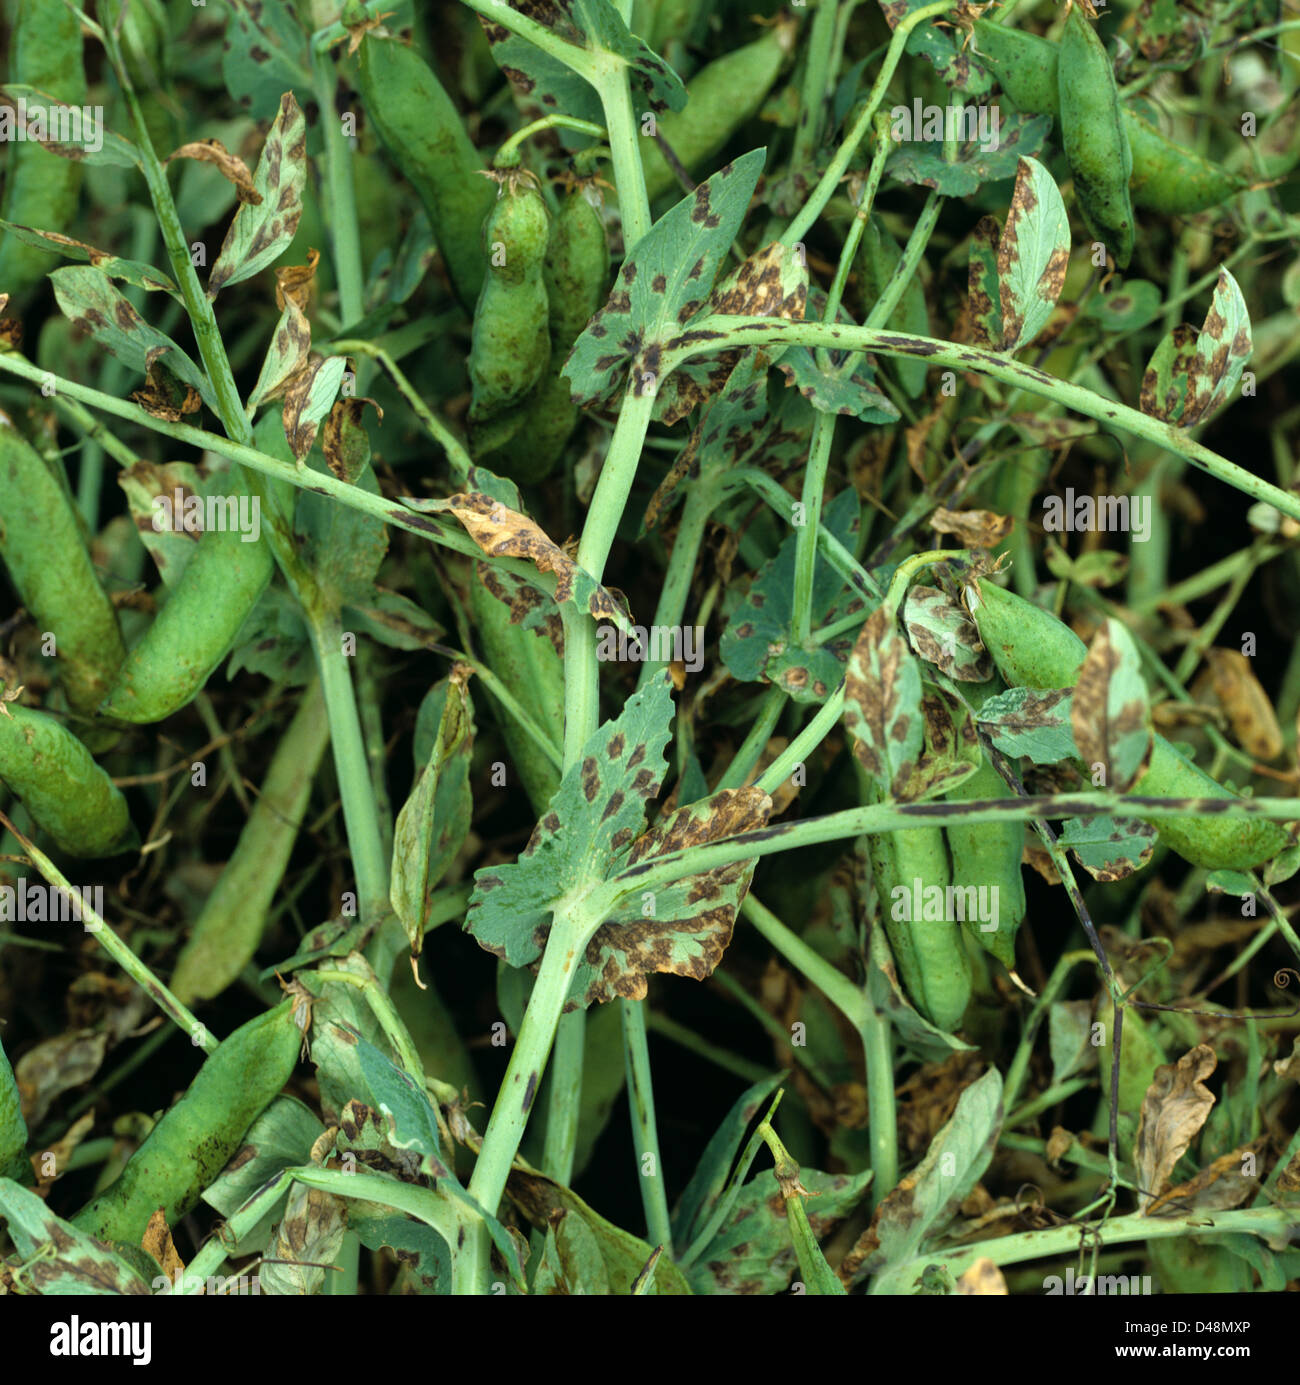 Leaf spot, Mychosphaerella pinodes, lesions on pea crop leaves and pods Stock Photo